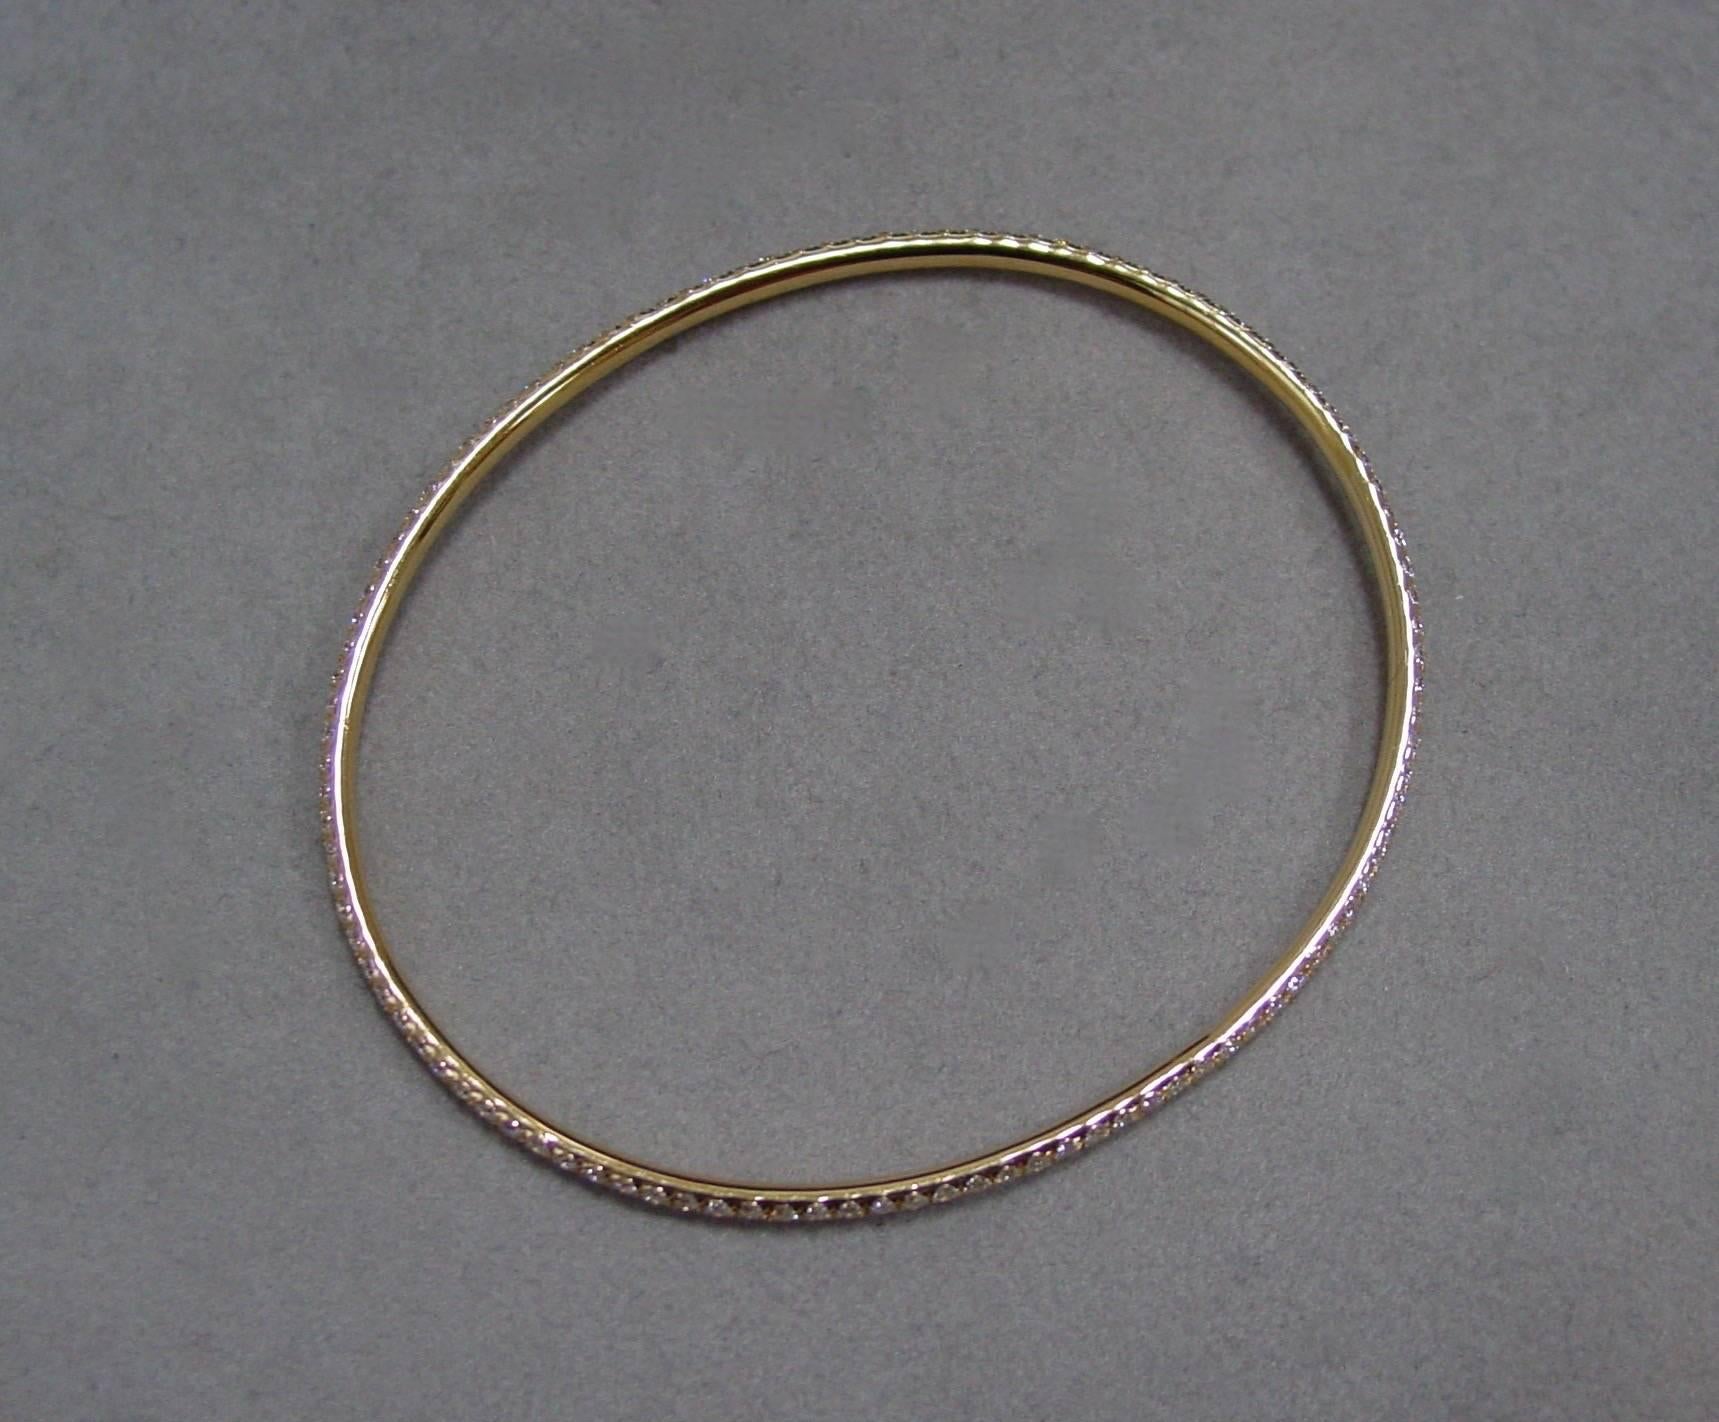 Pave Diamond Gold Bangle Bracelet In Excellent Condition For Sale In Beverly Hills, CA